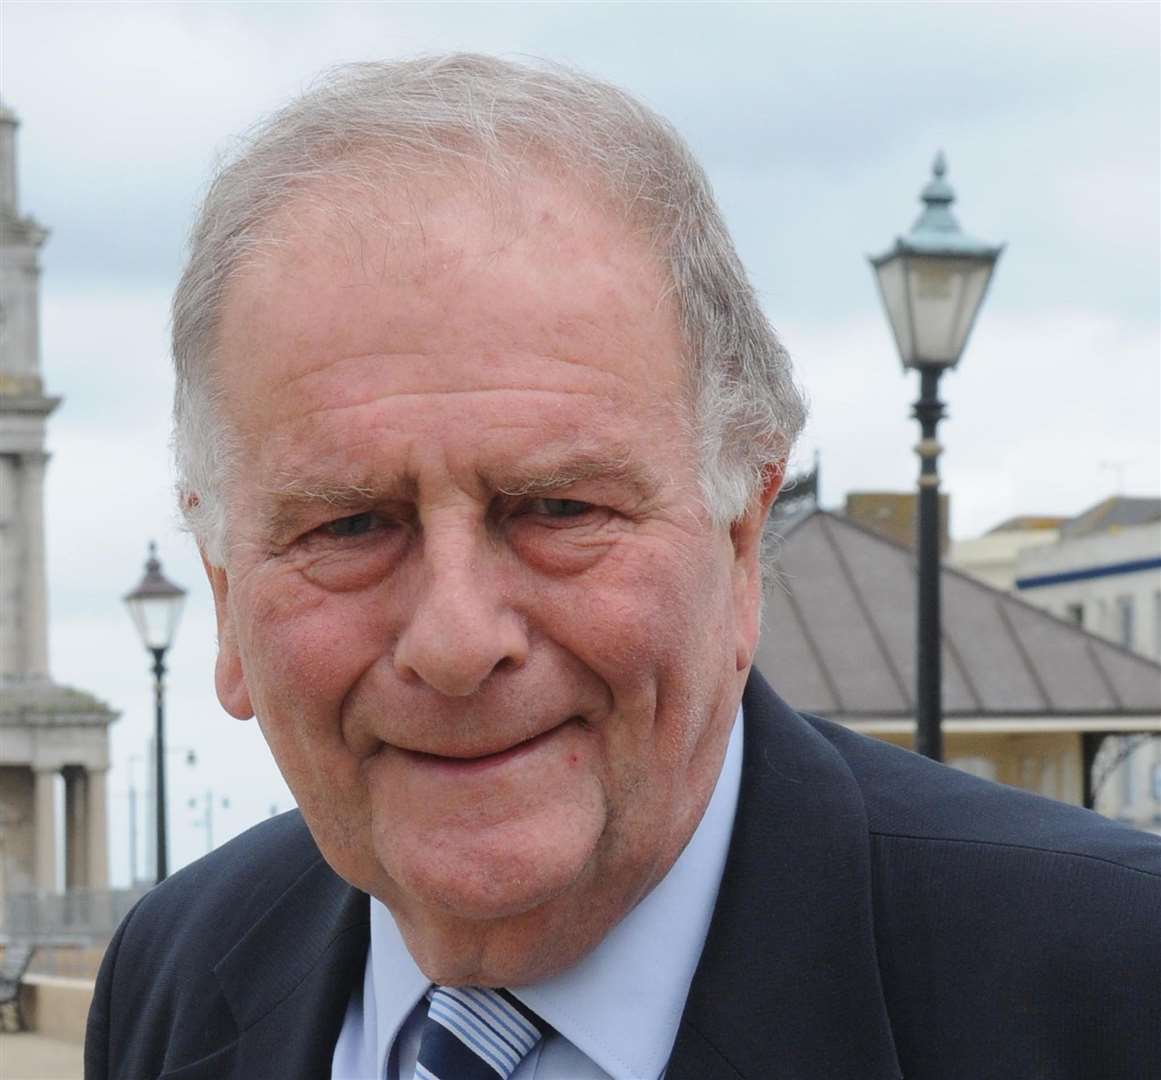 Sir Roger Gale believes a 'no-deal' Brexit would impact the supply of food and pharmaceuticals to the UK